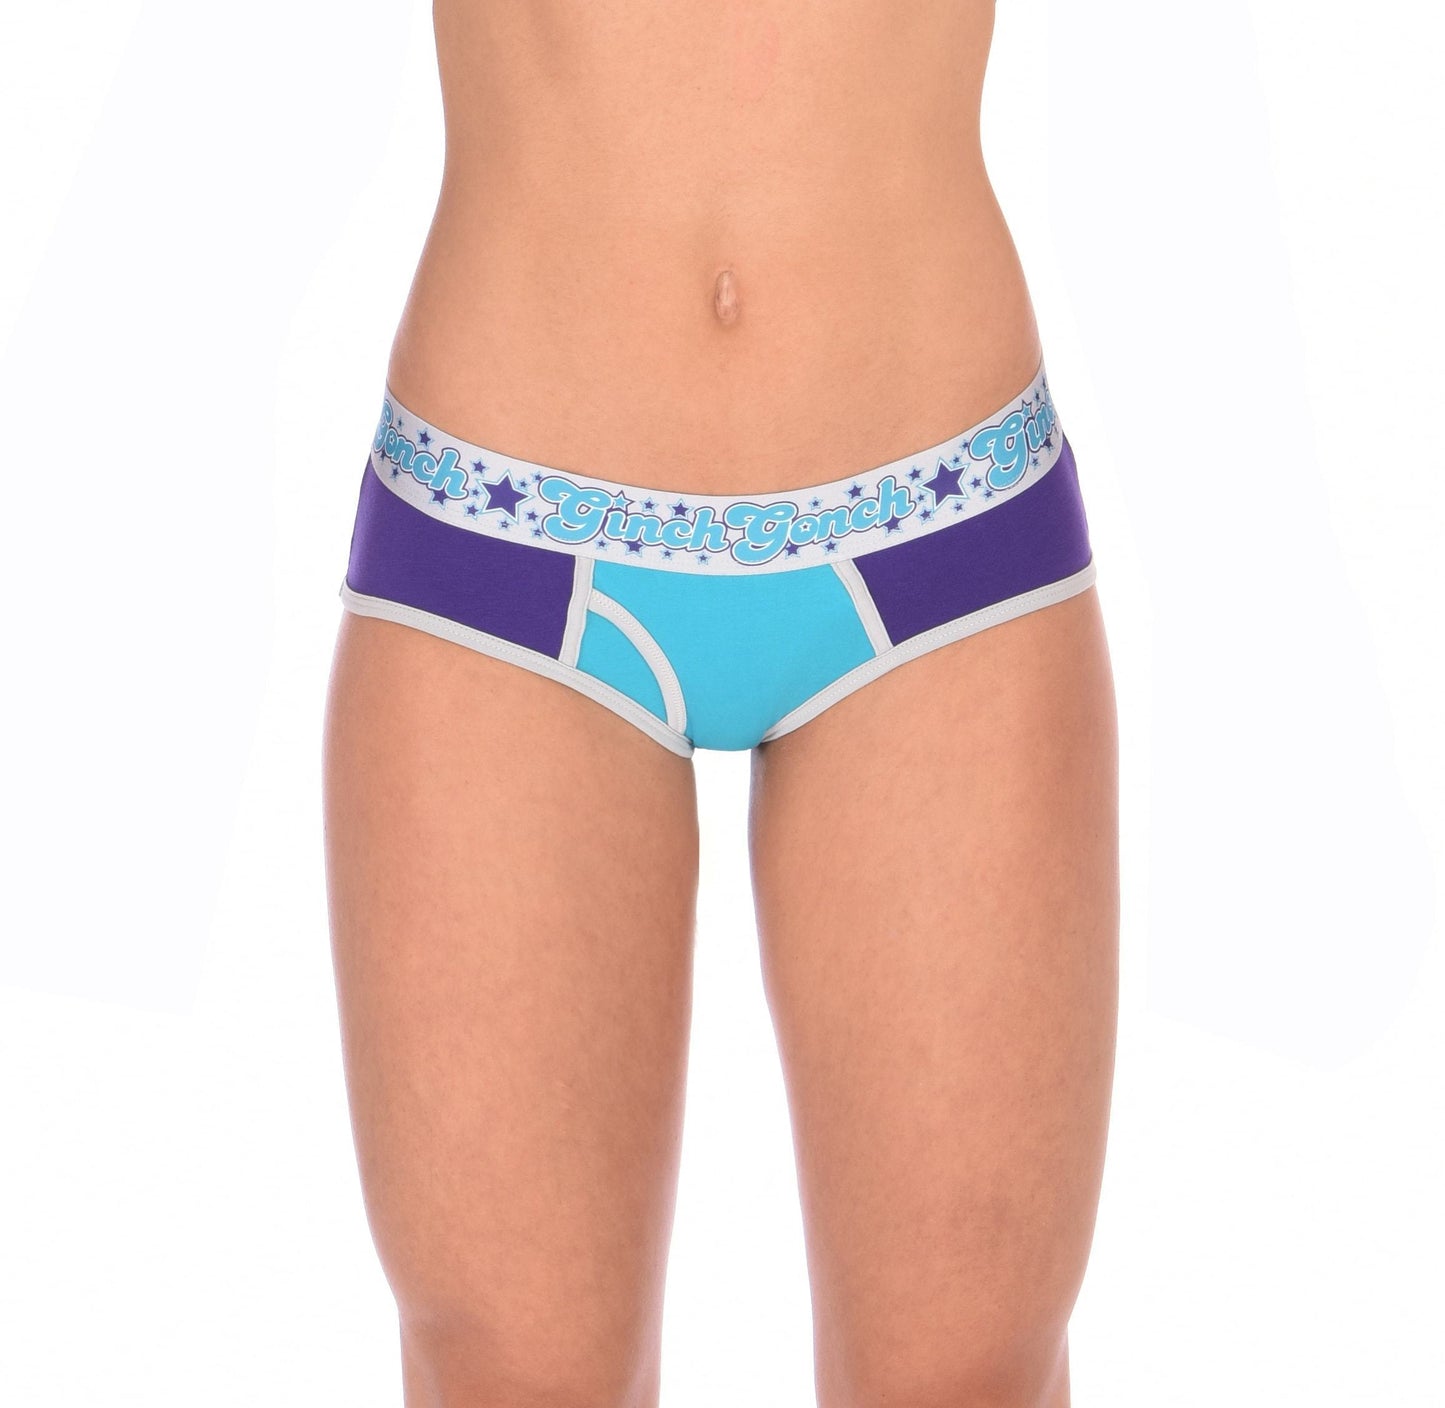 GG Ginch Gonch Purple Haze Low Rise boy cut Brief y front - Women's Underwear purple and aqua panels with grey trim and silver printed waistband front 